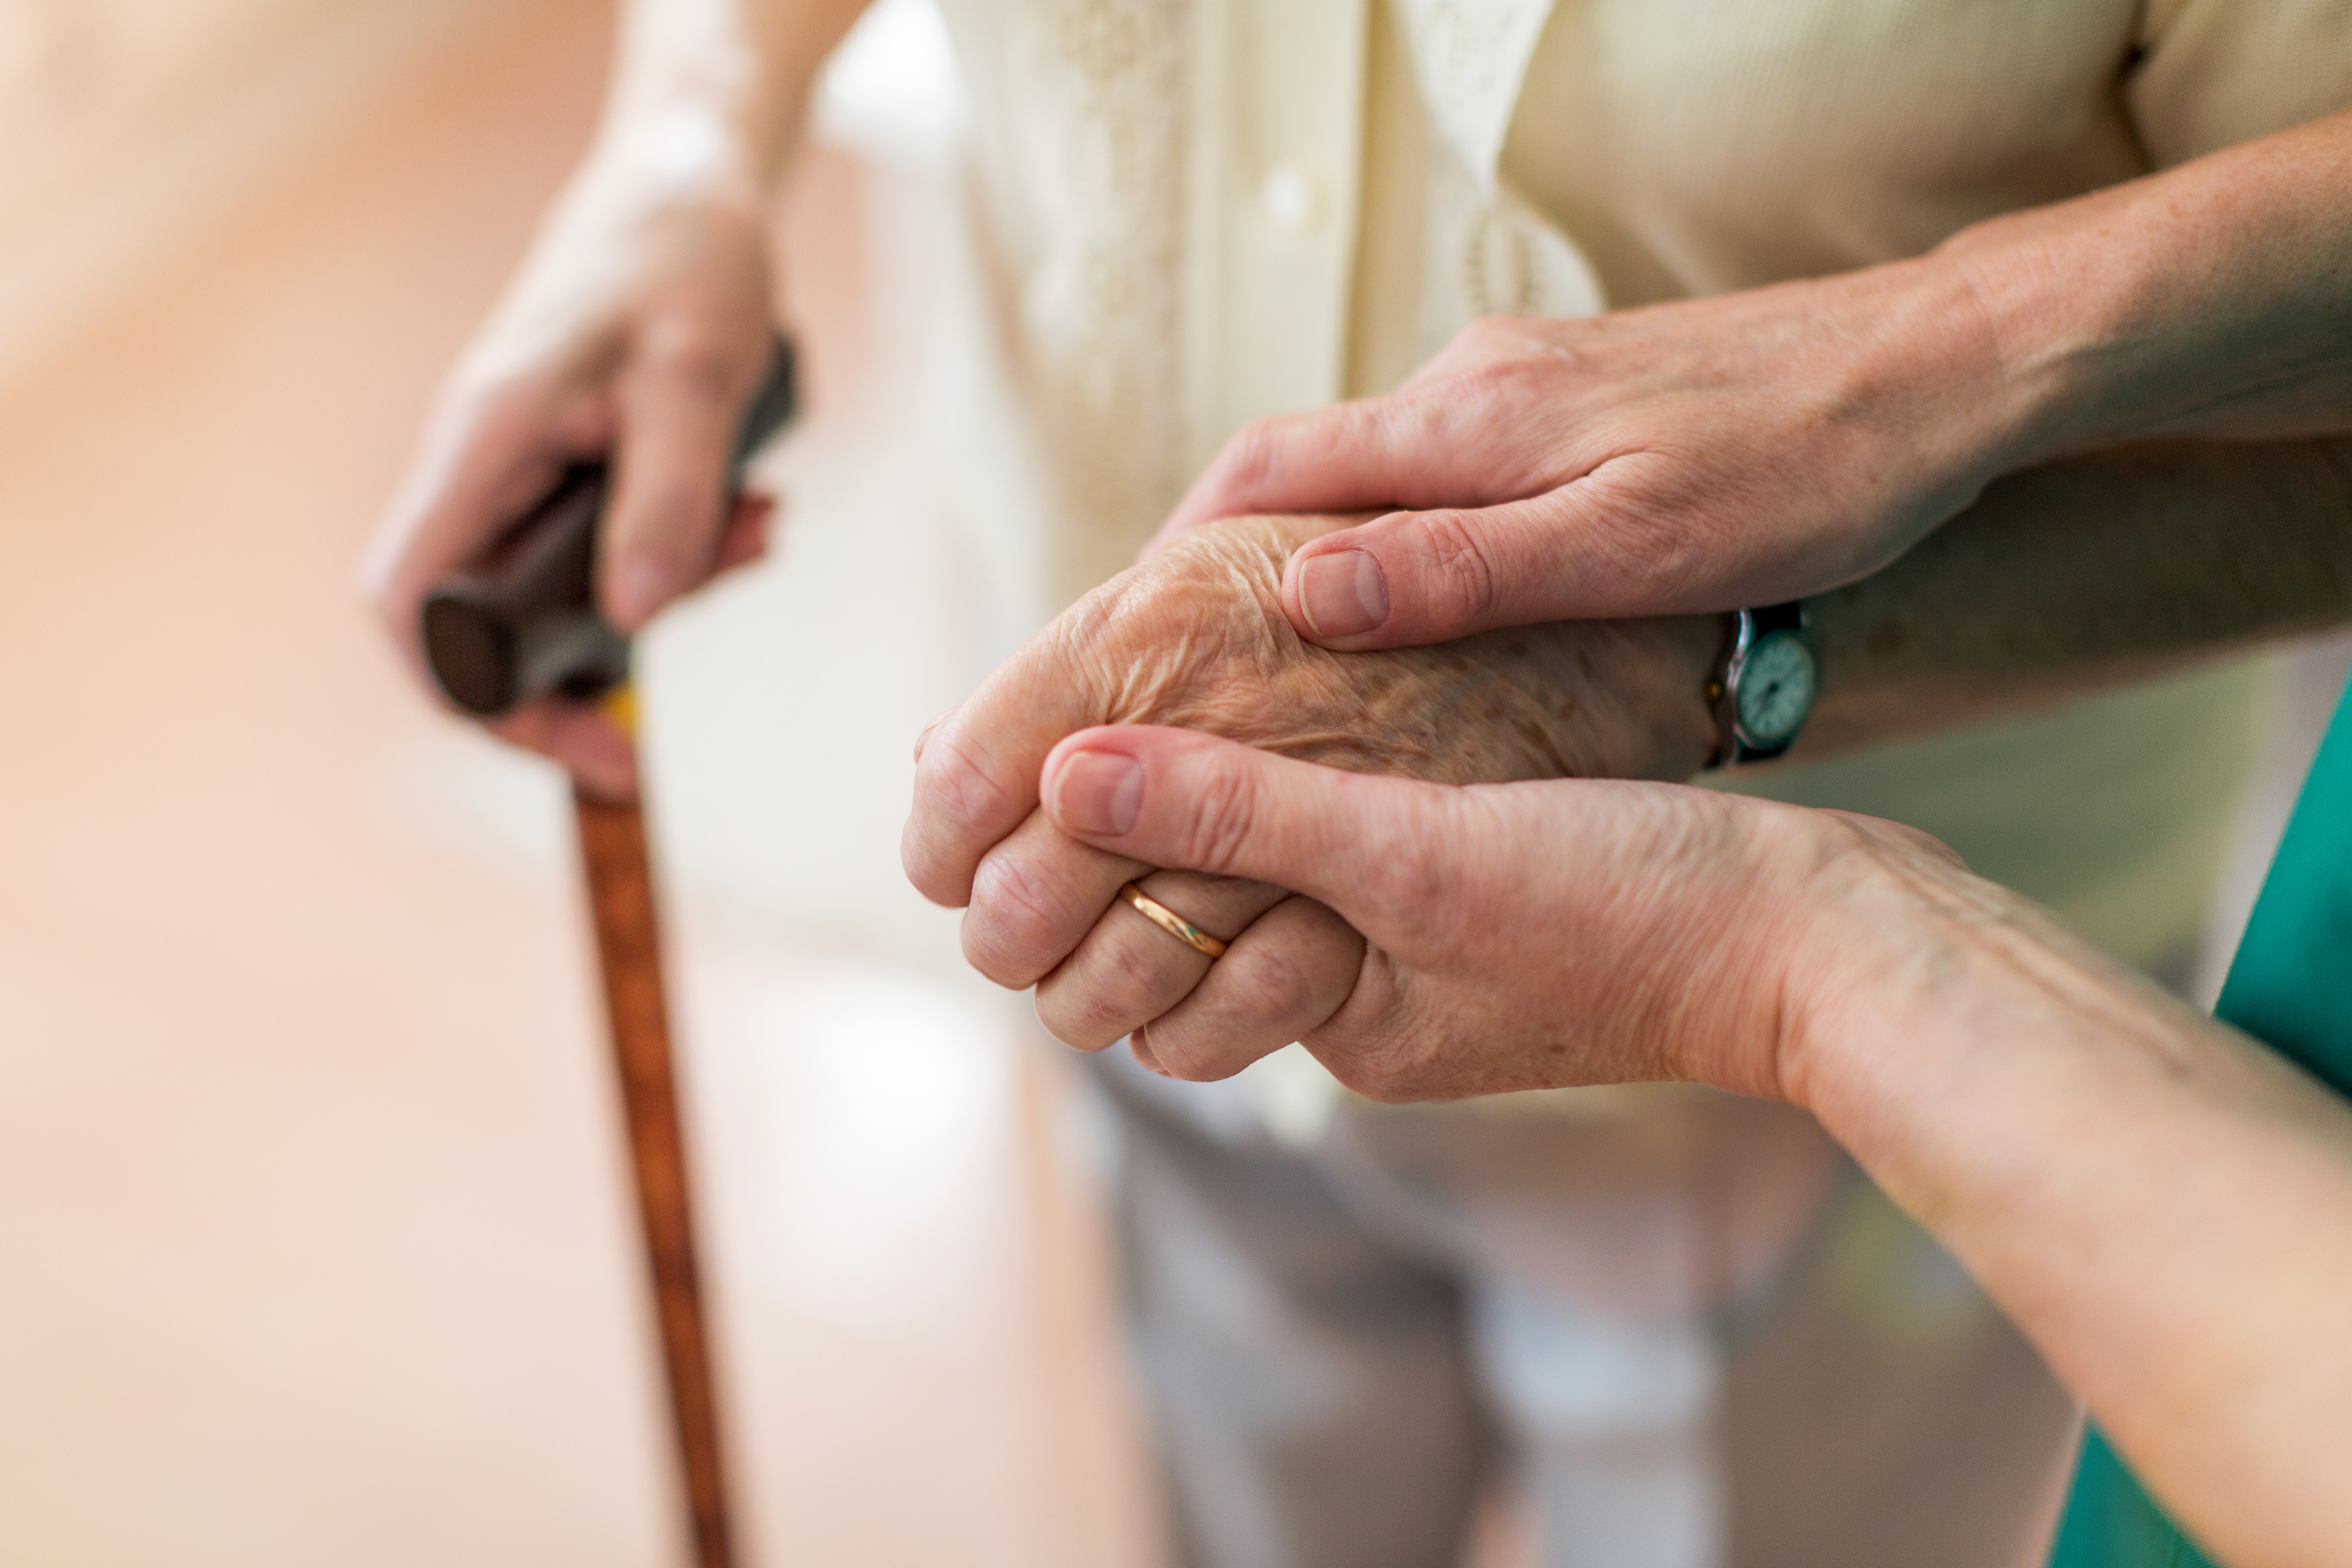 Nurse consoling her elderly patient by holding her hands. | Source: Shutterstock